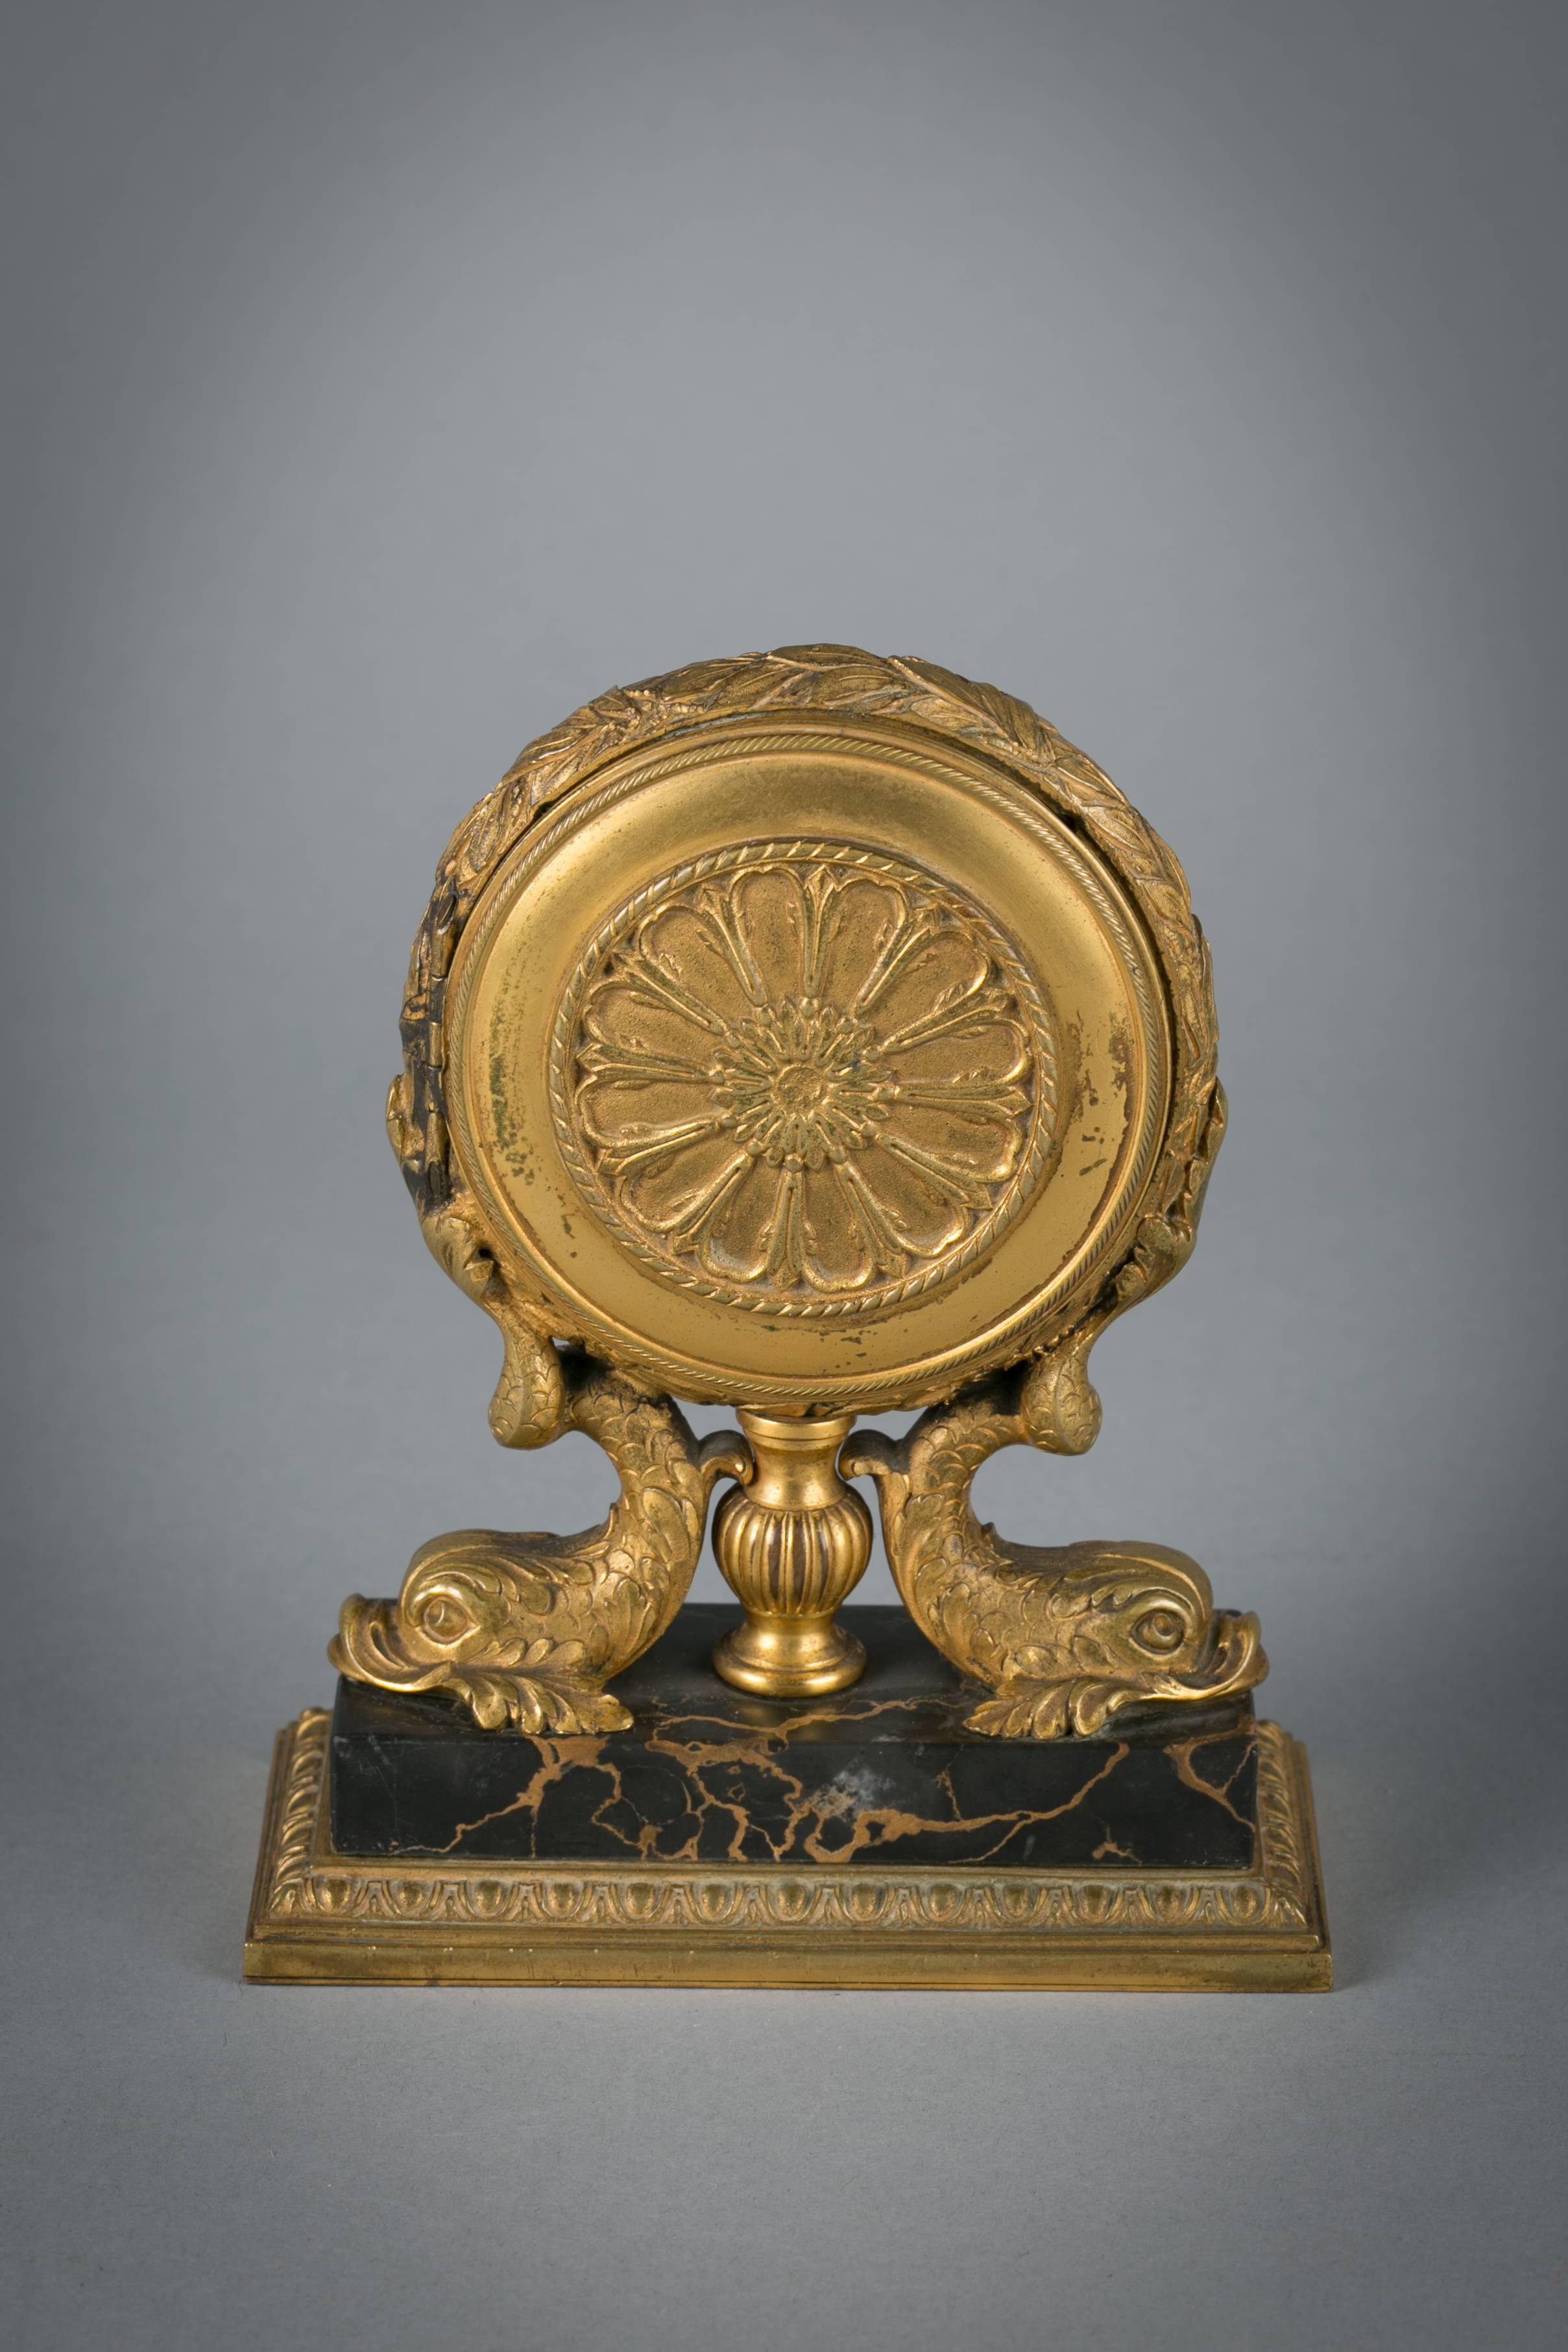 American bronze and marble desk clock. Marked sterling bronze Co. New York.